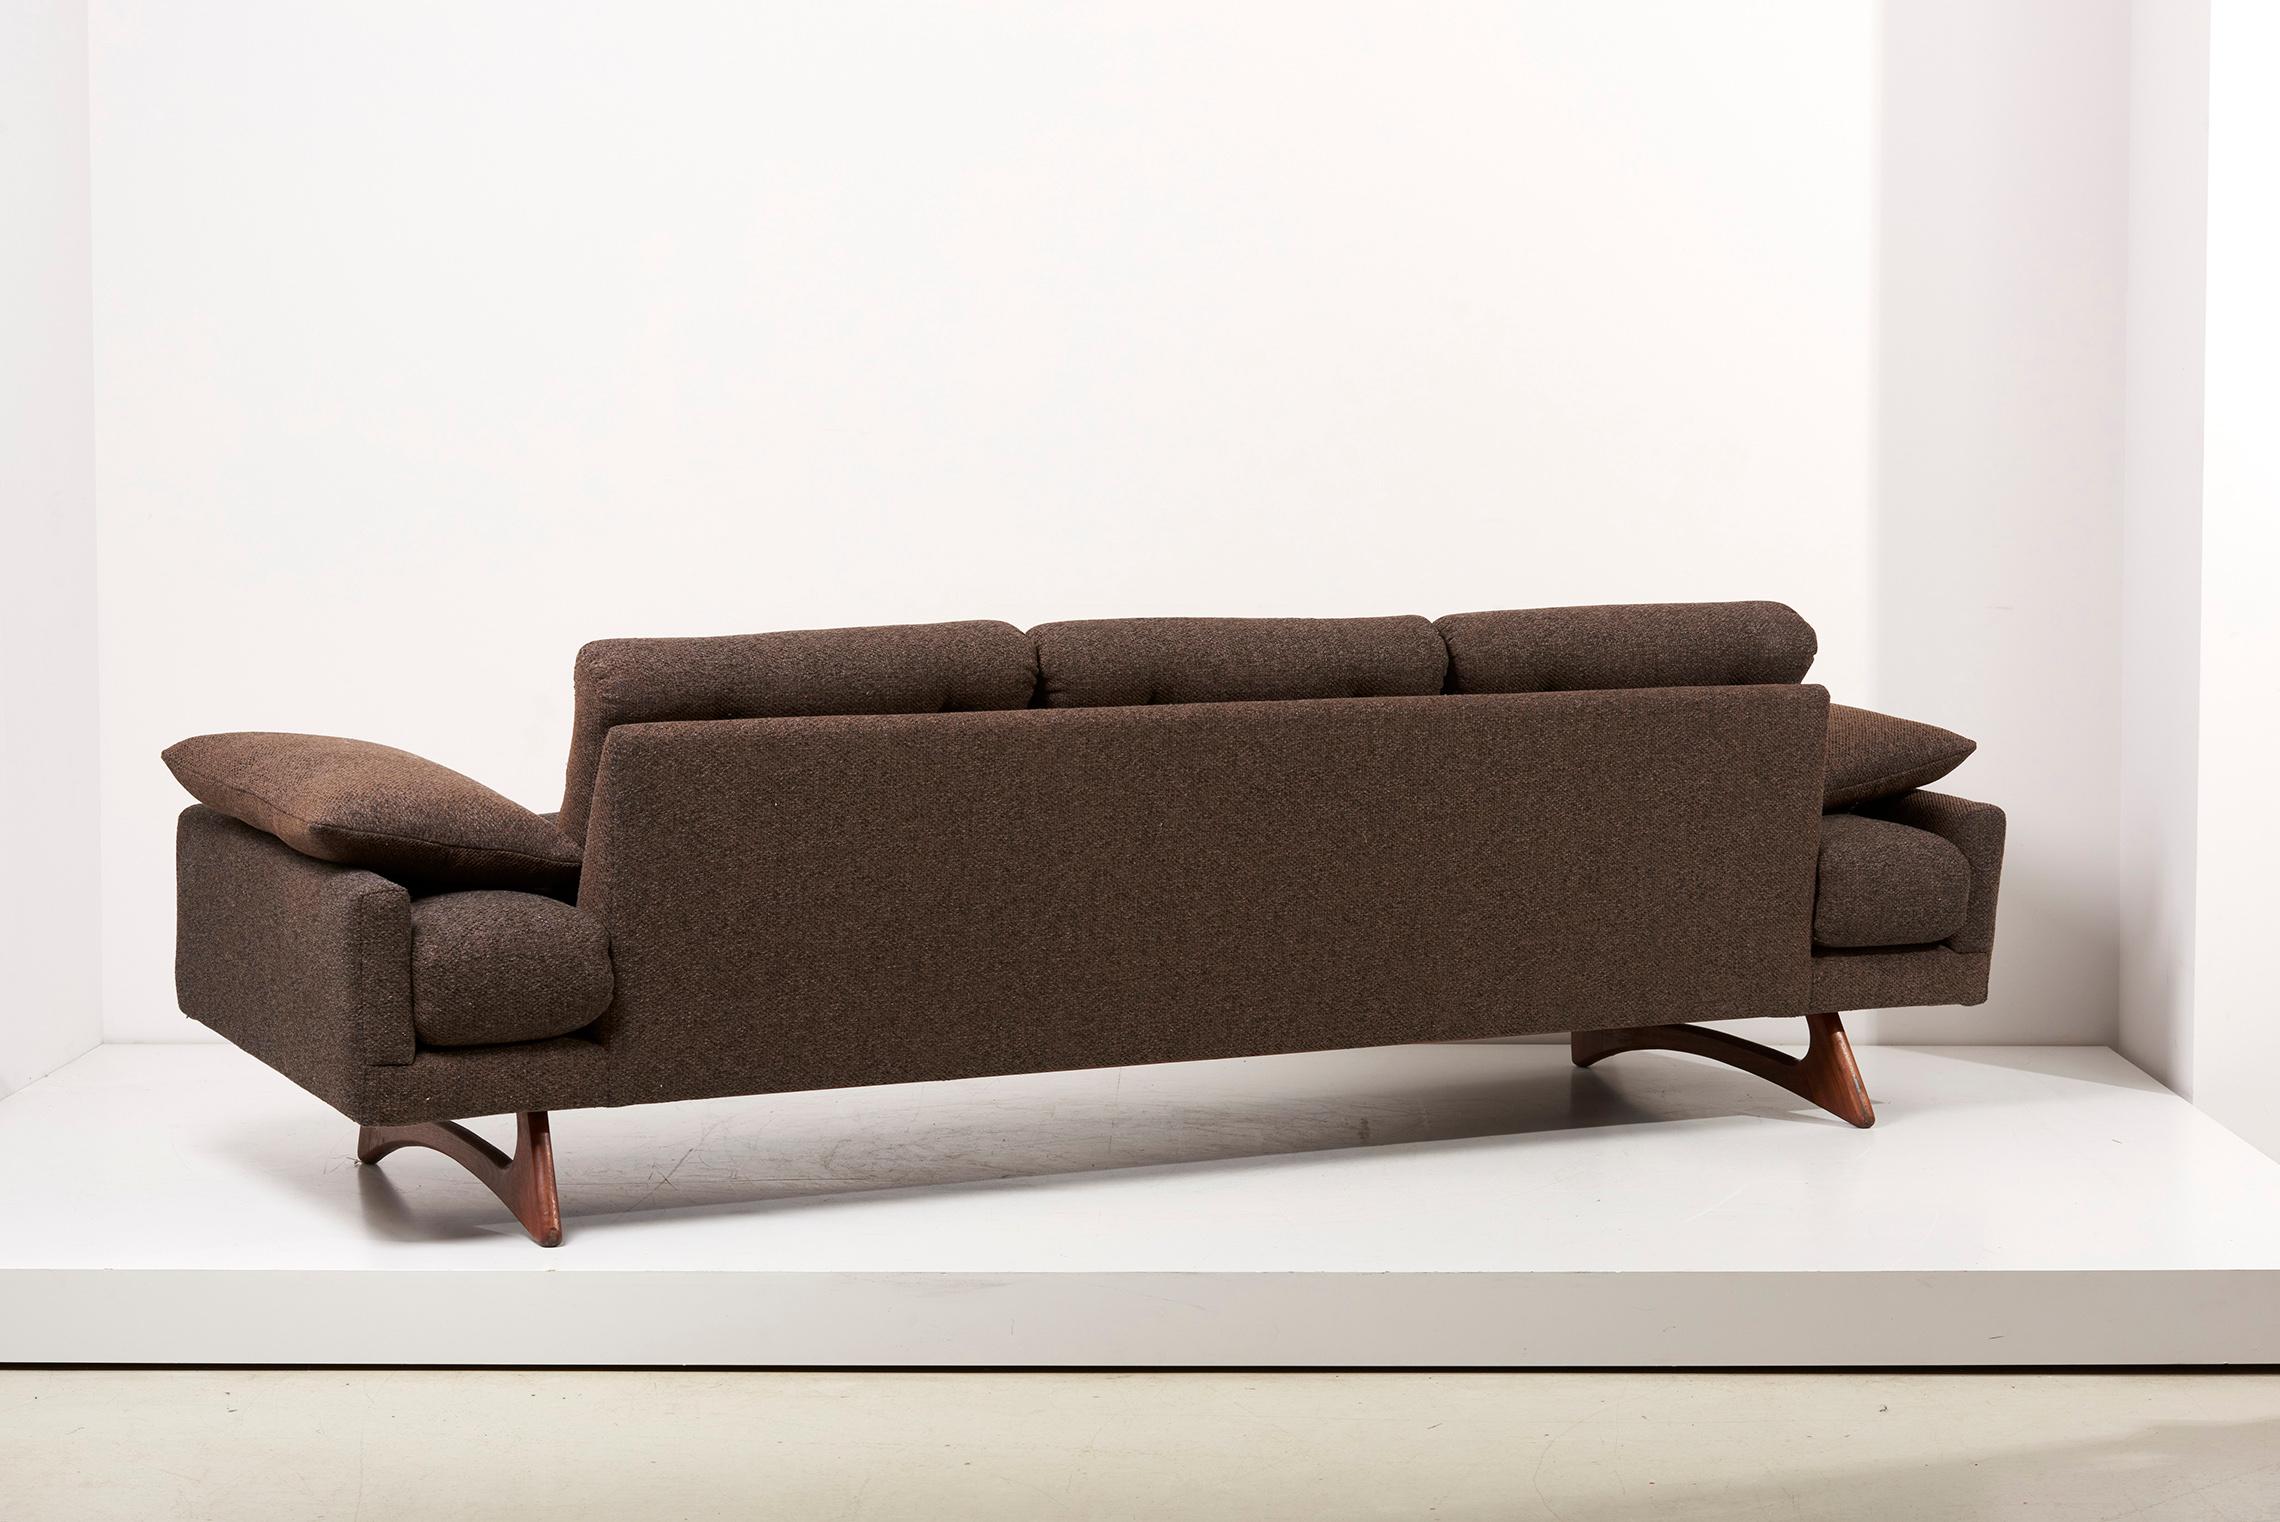 Mid-Century Modern Adrian Pearsall 'Gondola Sofa' in Brown Fabric for Craft Associates, USA, 1950s For Sale